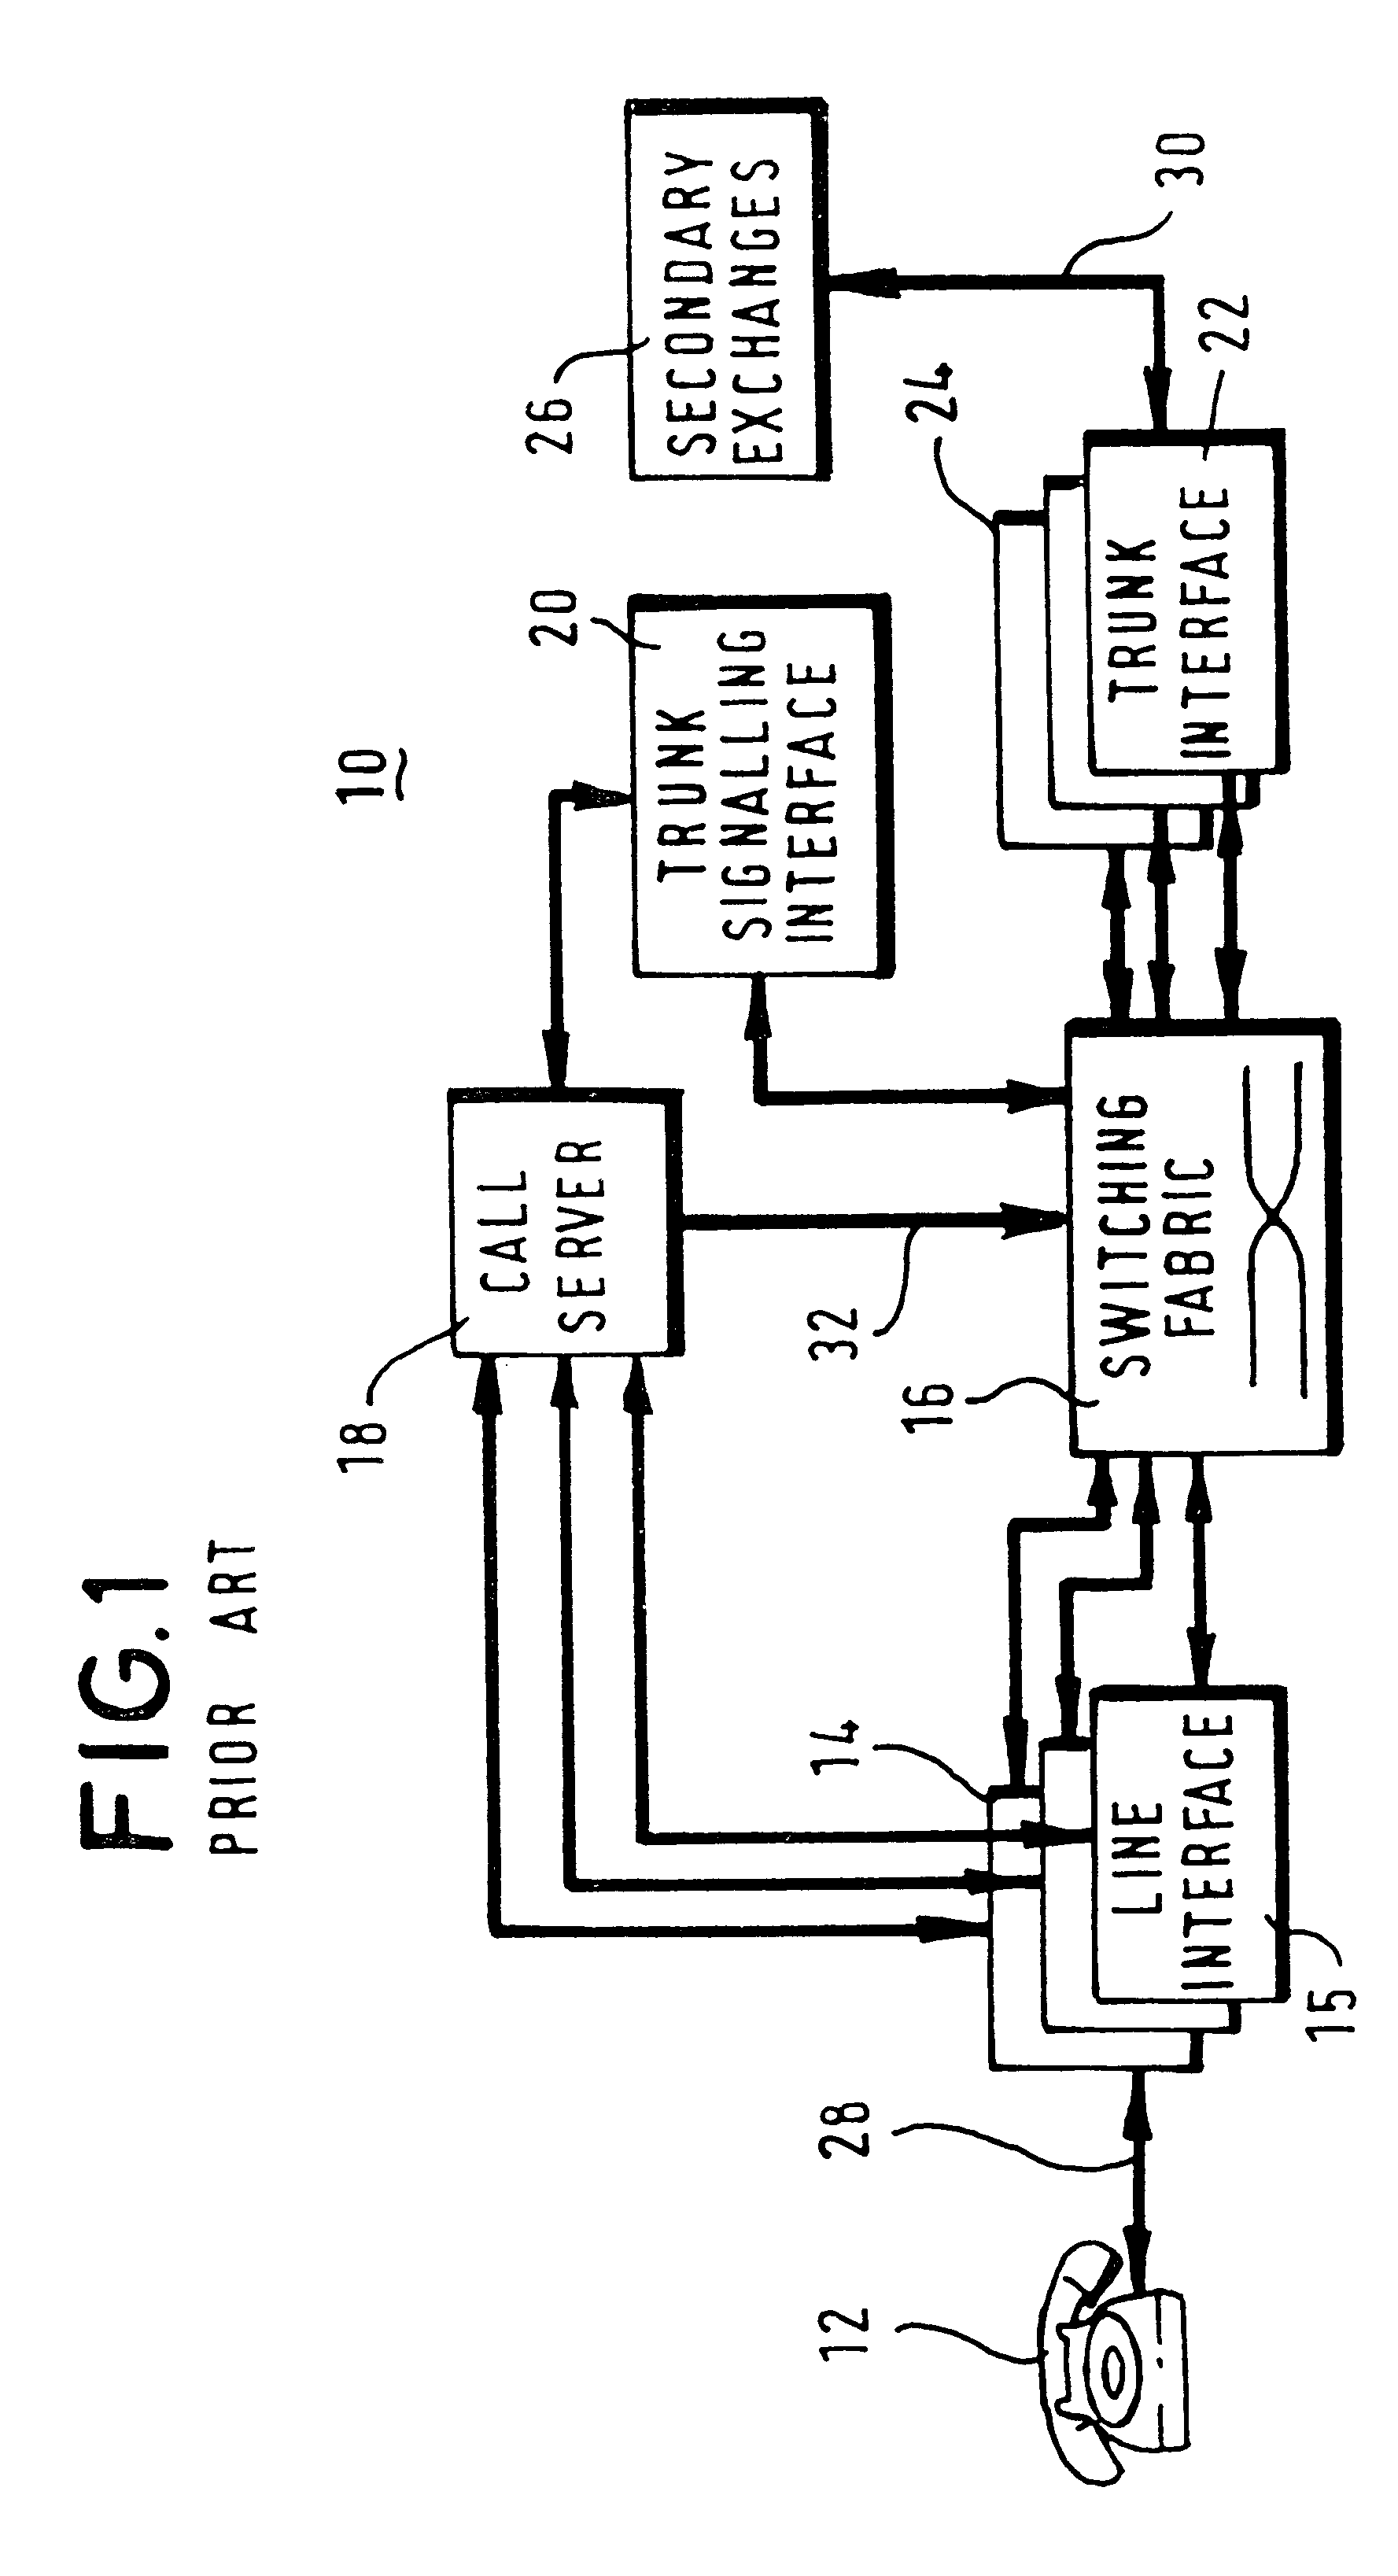 Communication system architecture and a management control agent and operating protocol therefor